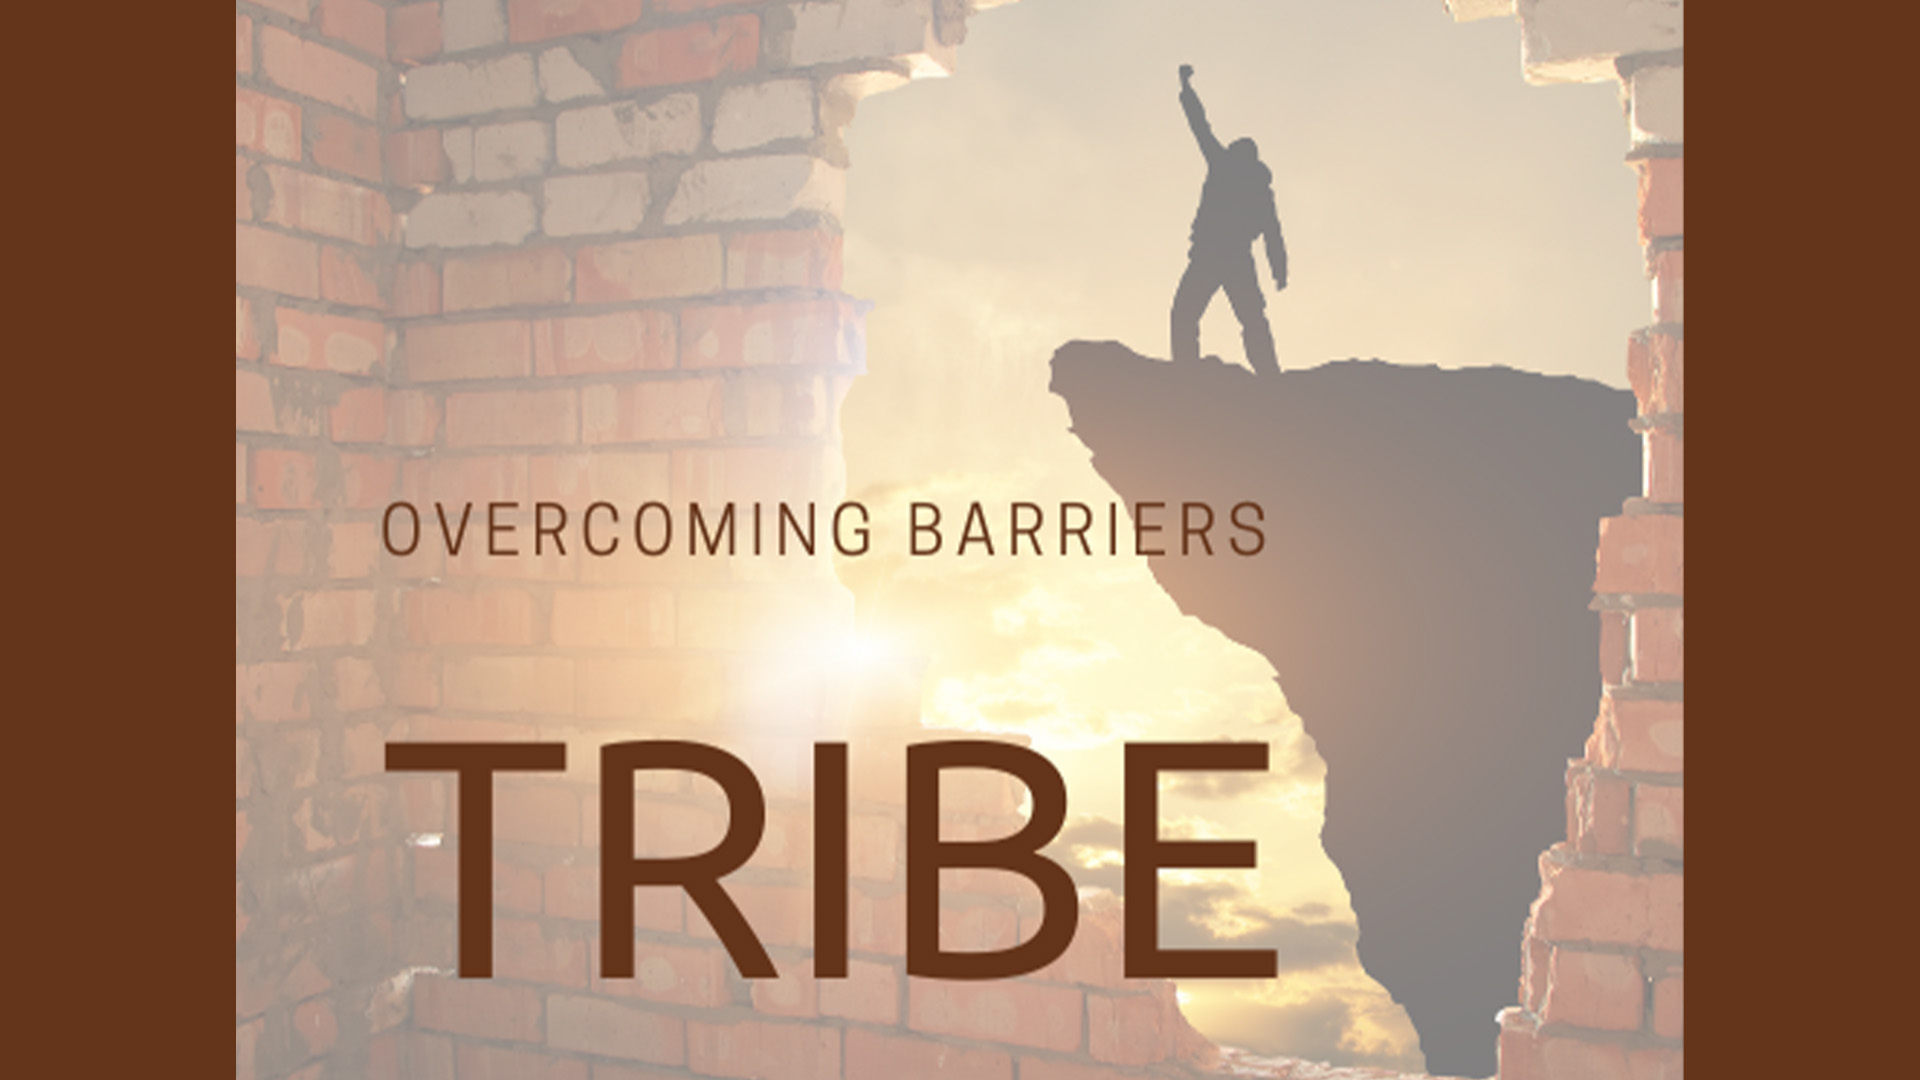 TRIBE (For Military and First Responders)

8-Week Program
Thursdays | 6:30-8:30pm
February 2 - March 23
